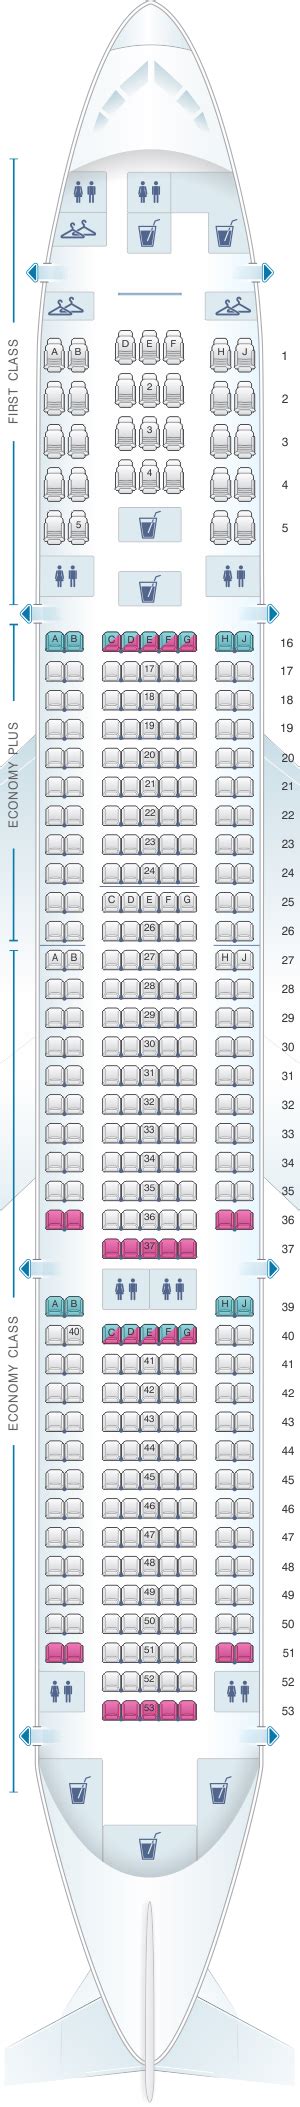 United Boeing 777 Seat Map